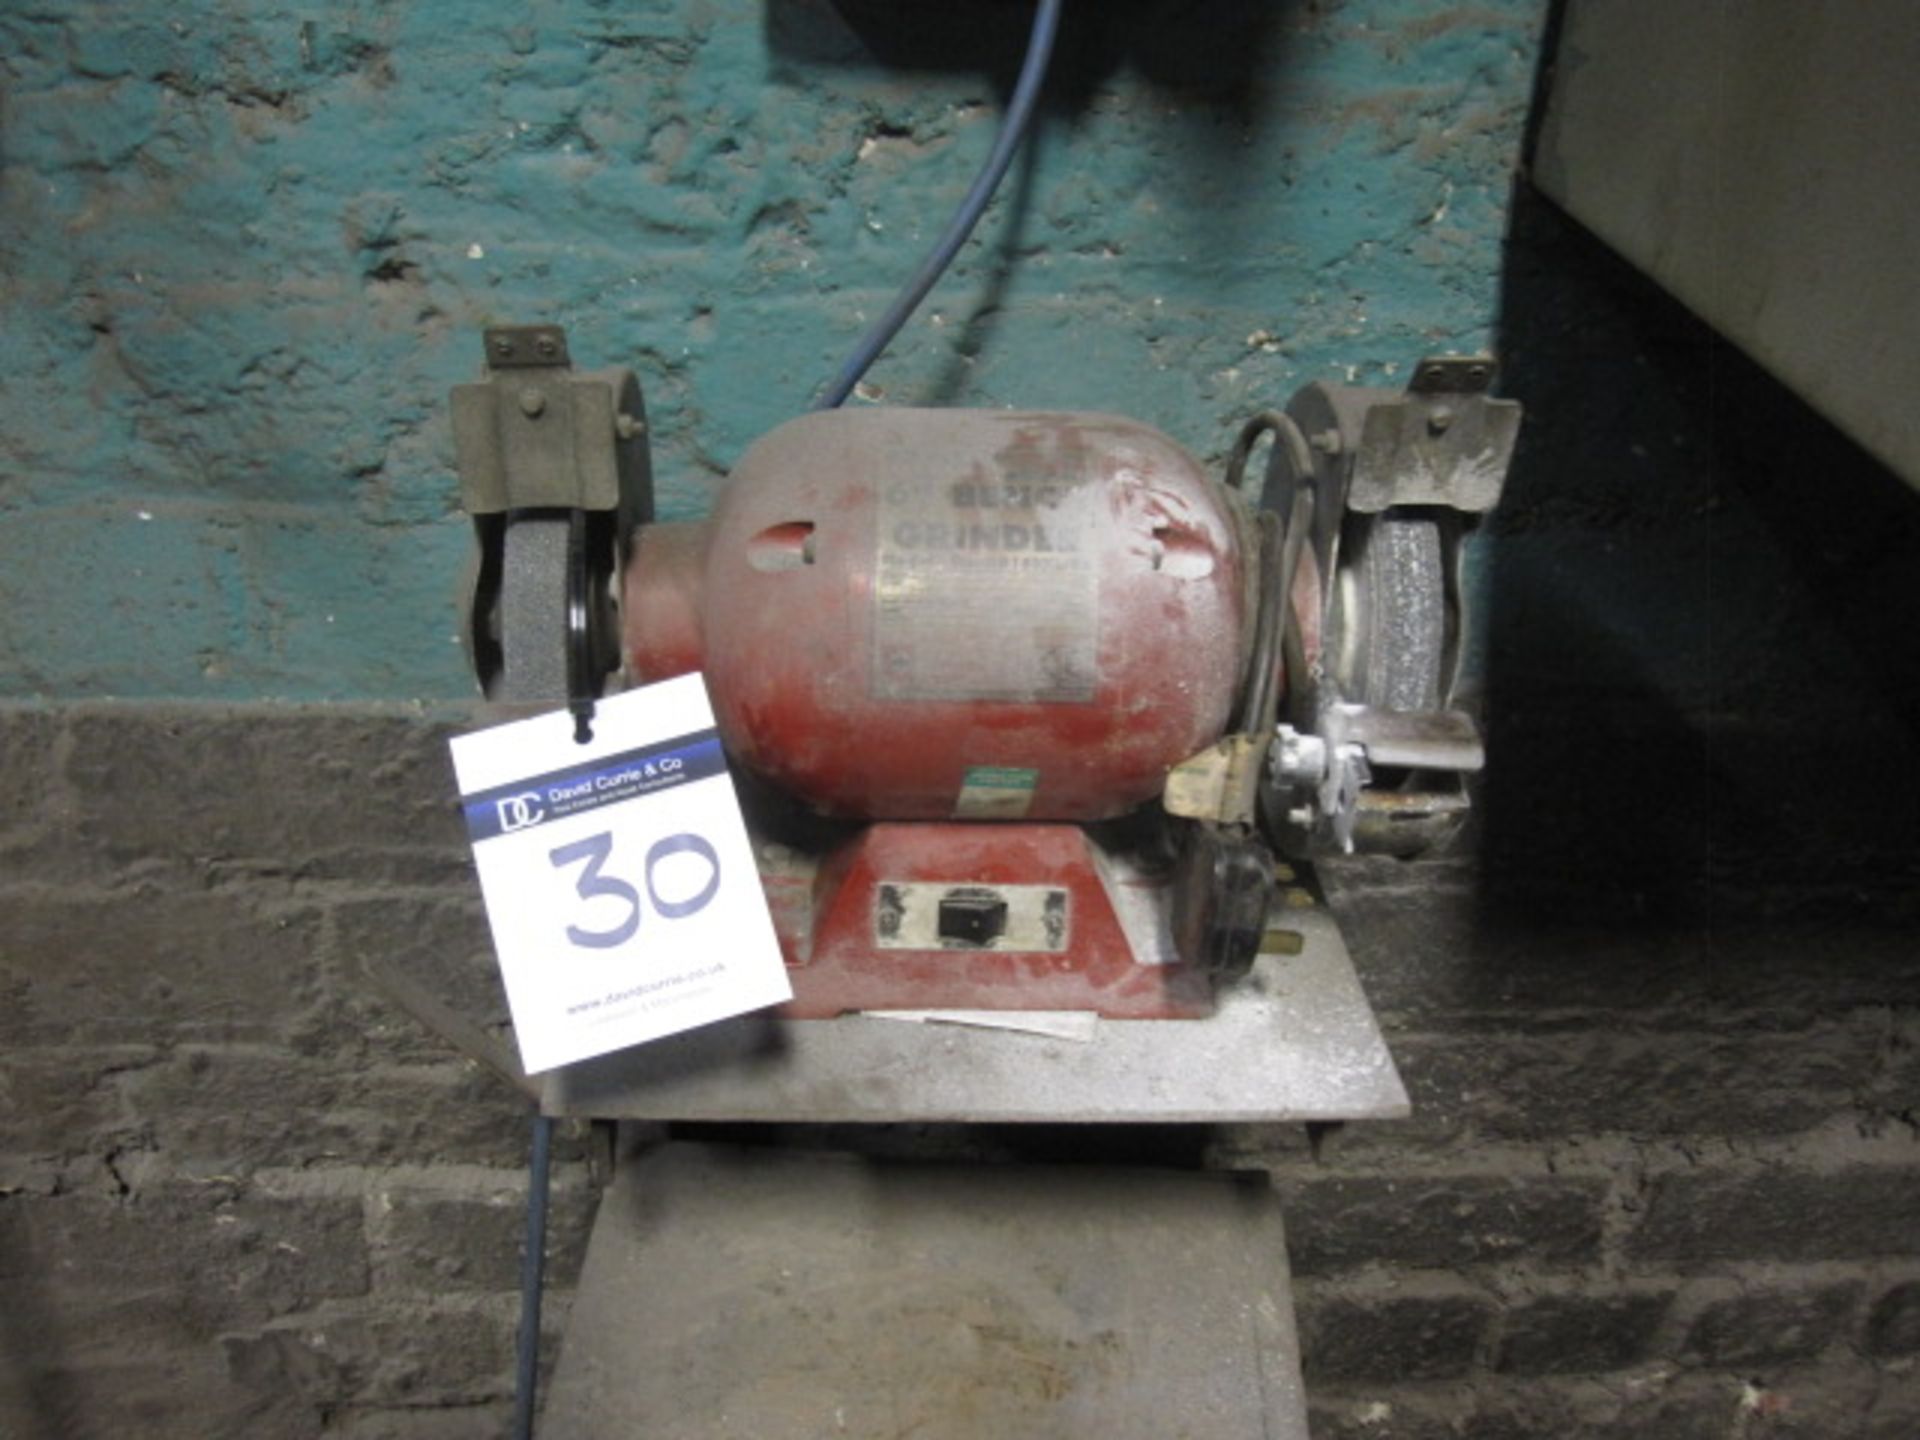 SEALEY 6" double ended bench grinder